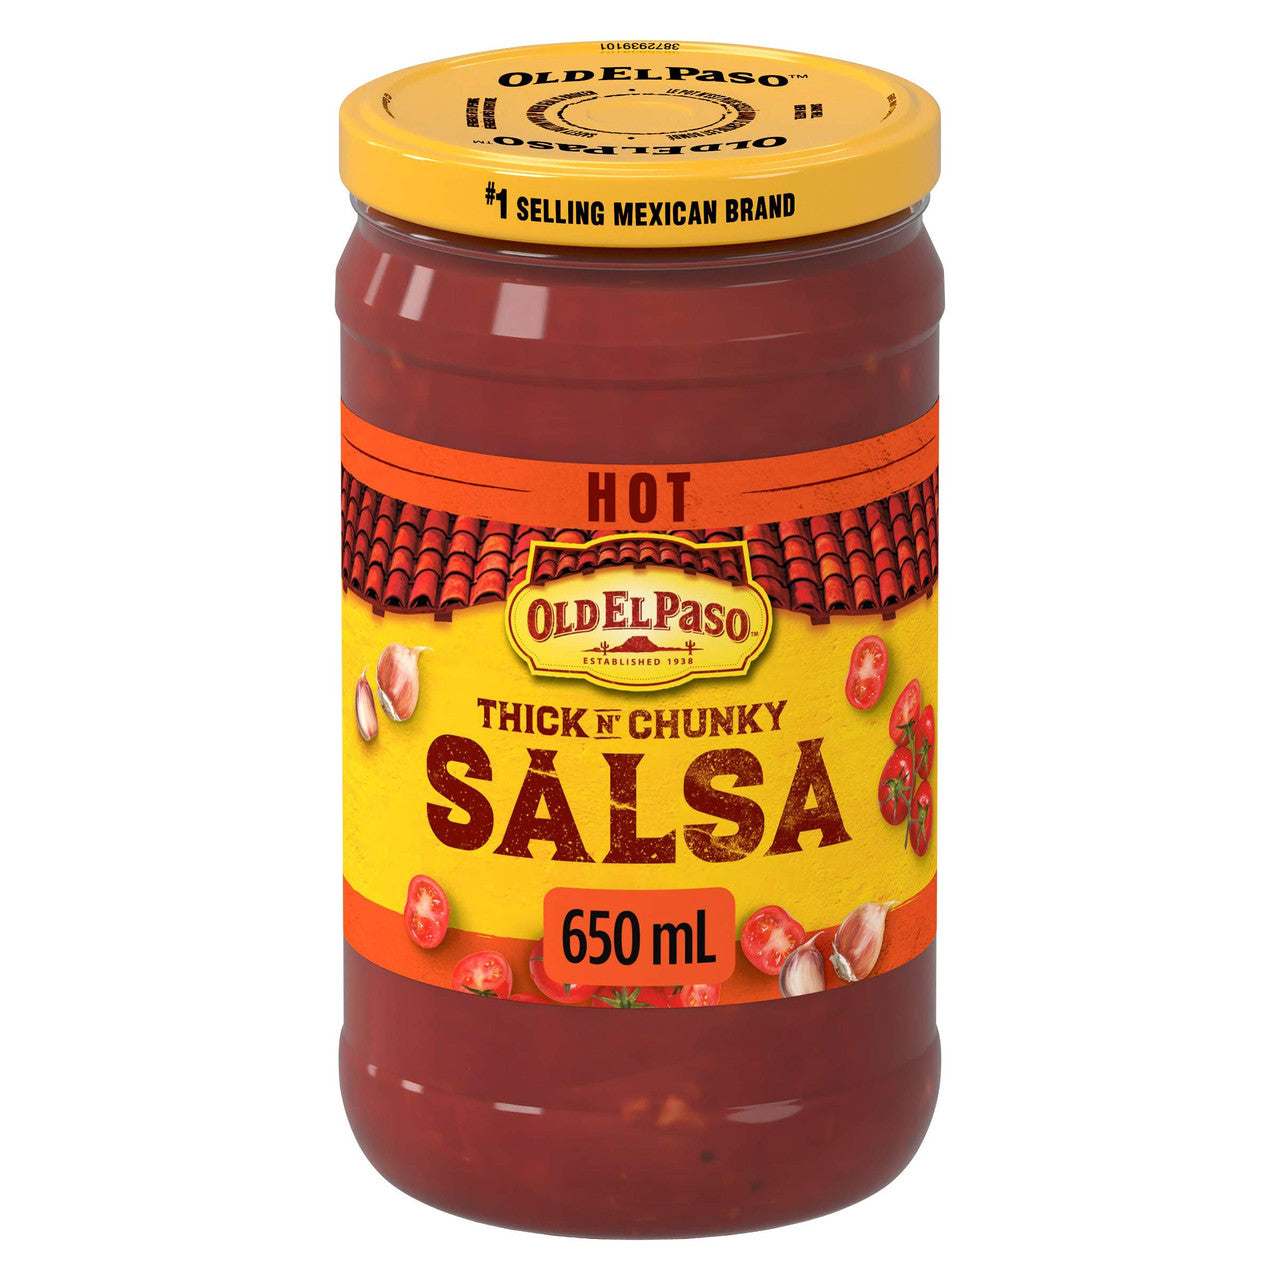 Old El Paso Thick 'n Chunky Hot Salsa, 650ml/22 oz., {Imported from Canada}